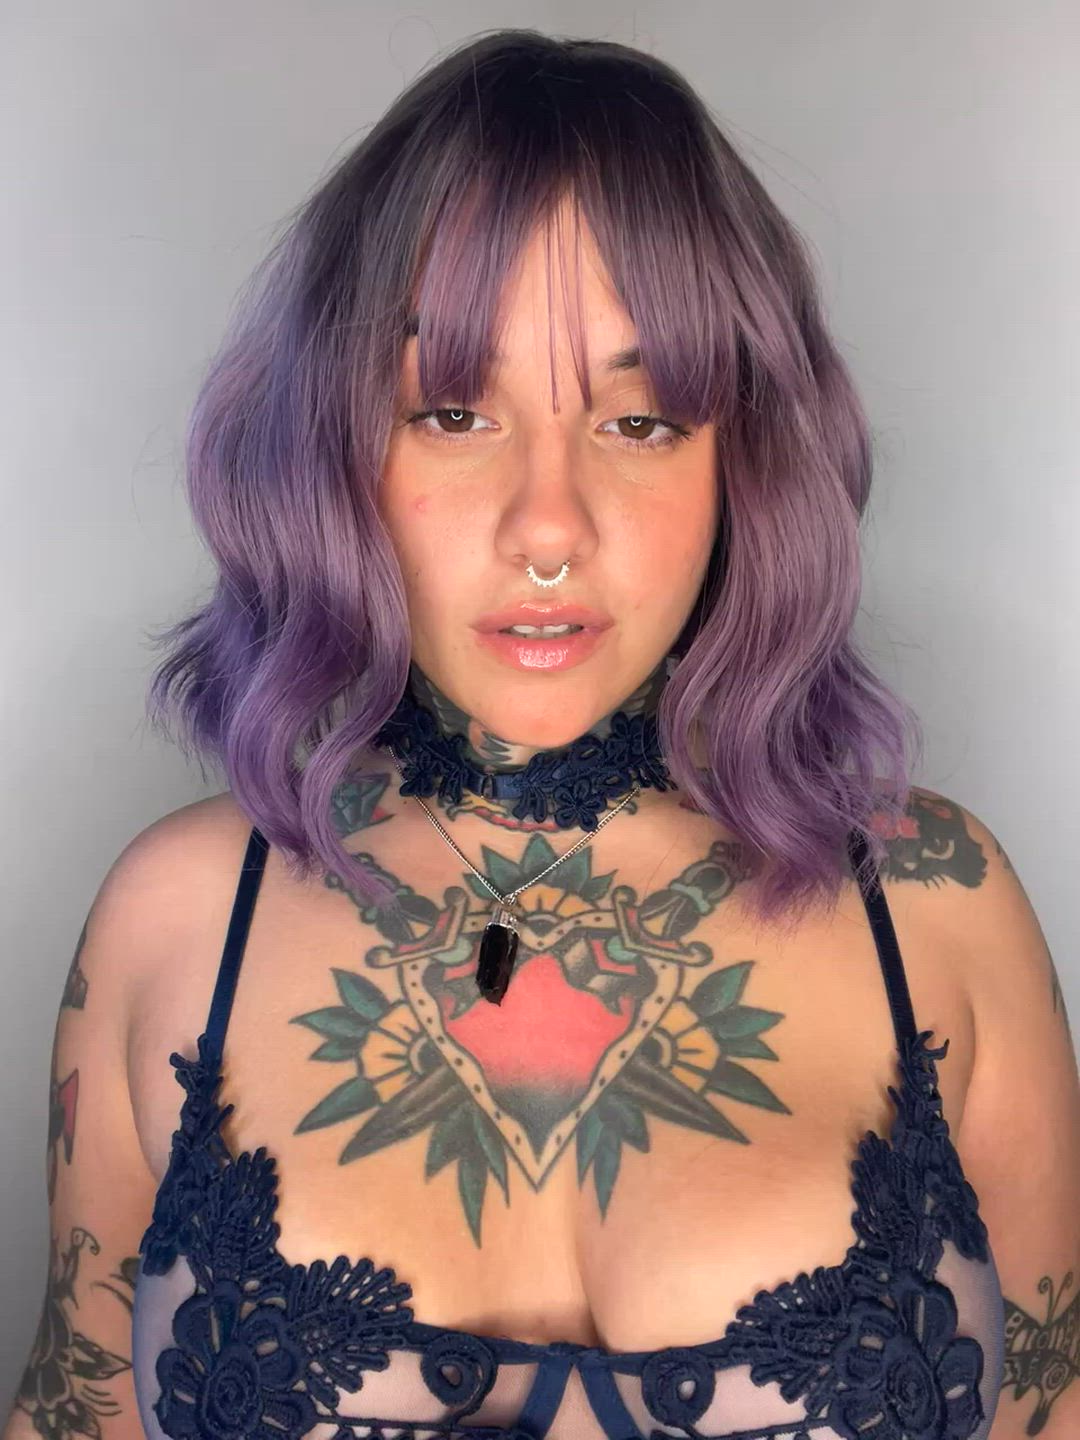 R/sph porn video with onlyfans model Shelby Cobra <strong>@shelbycobravip</strong>